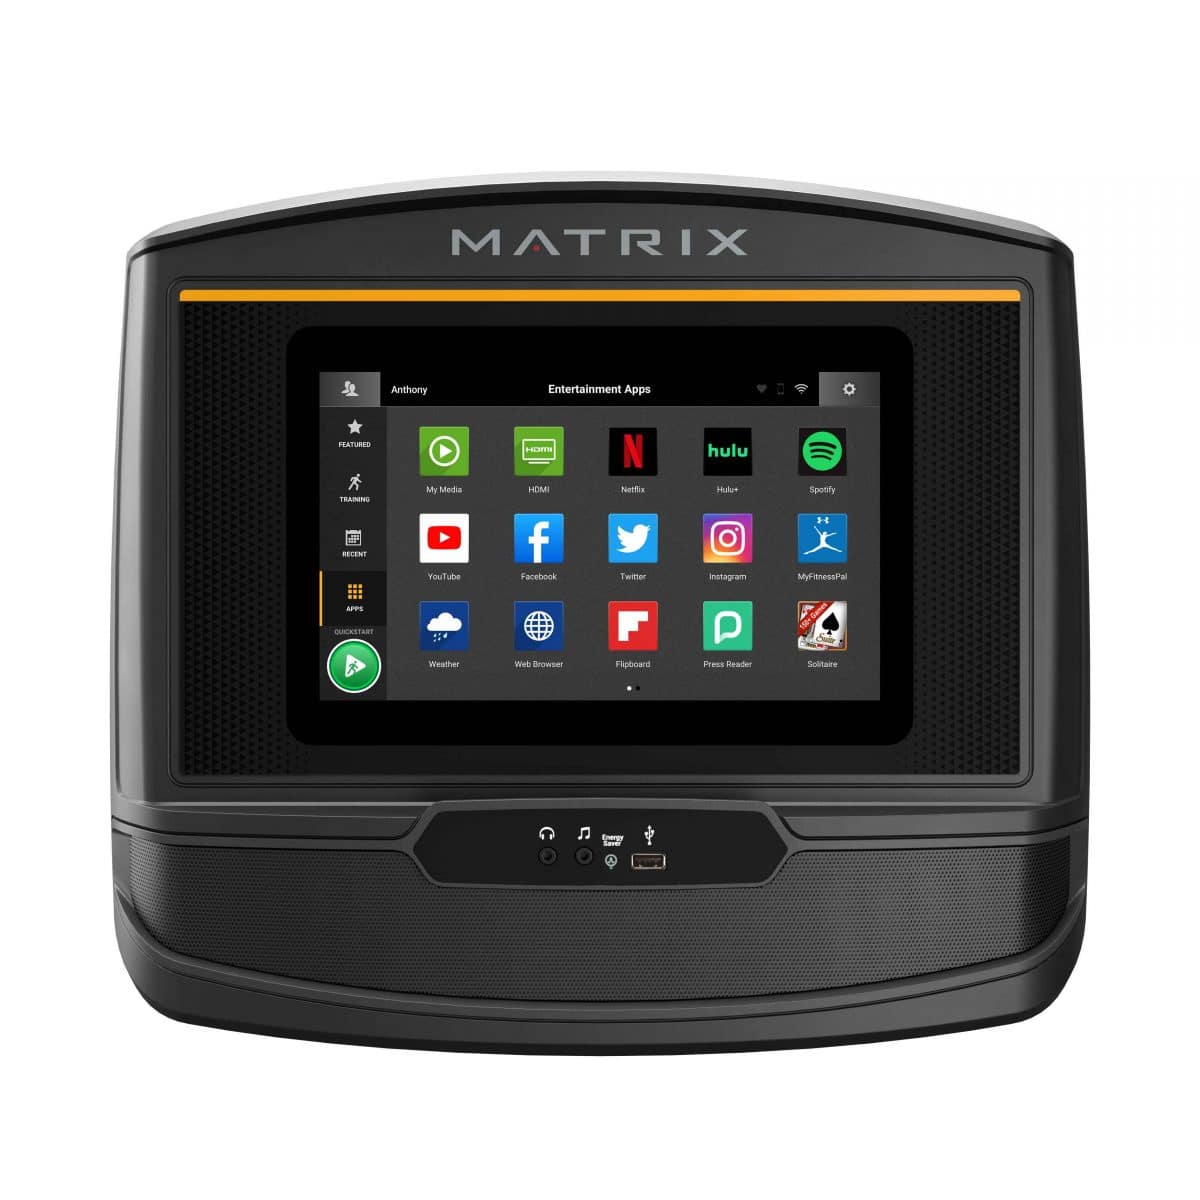 The matrix gps system is shown on a white background.